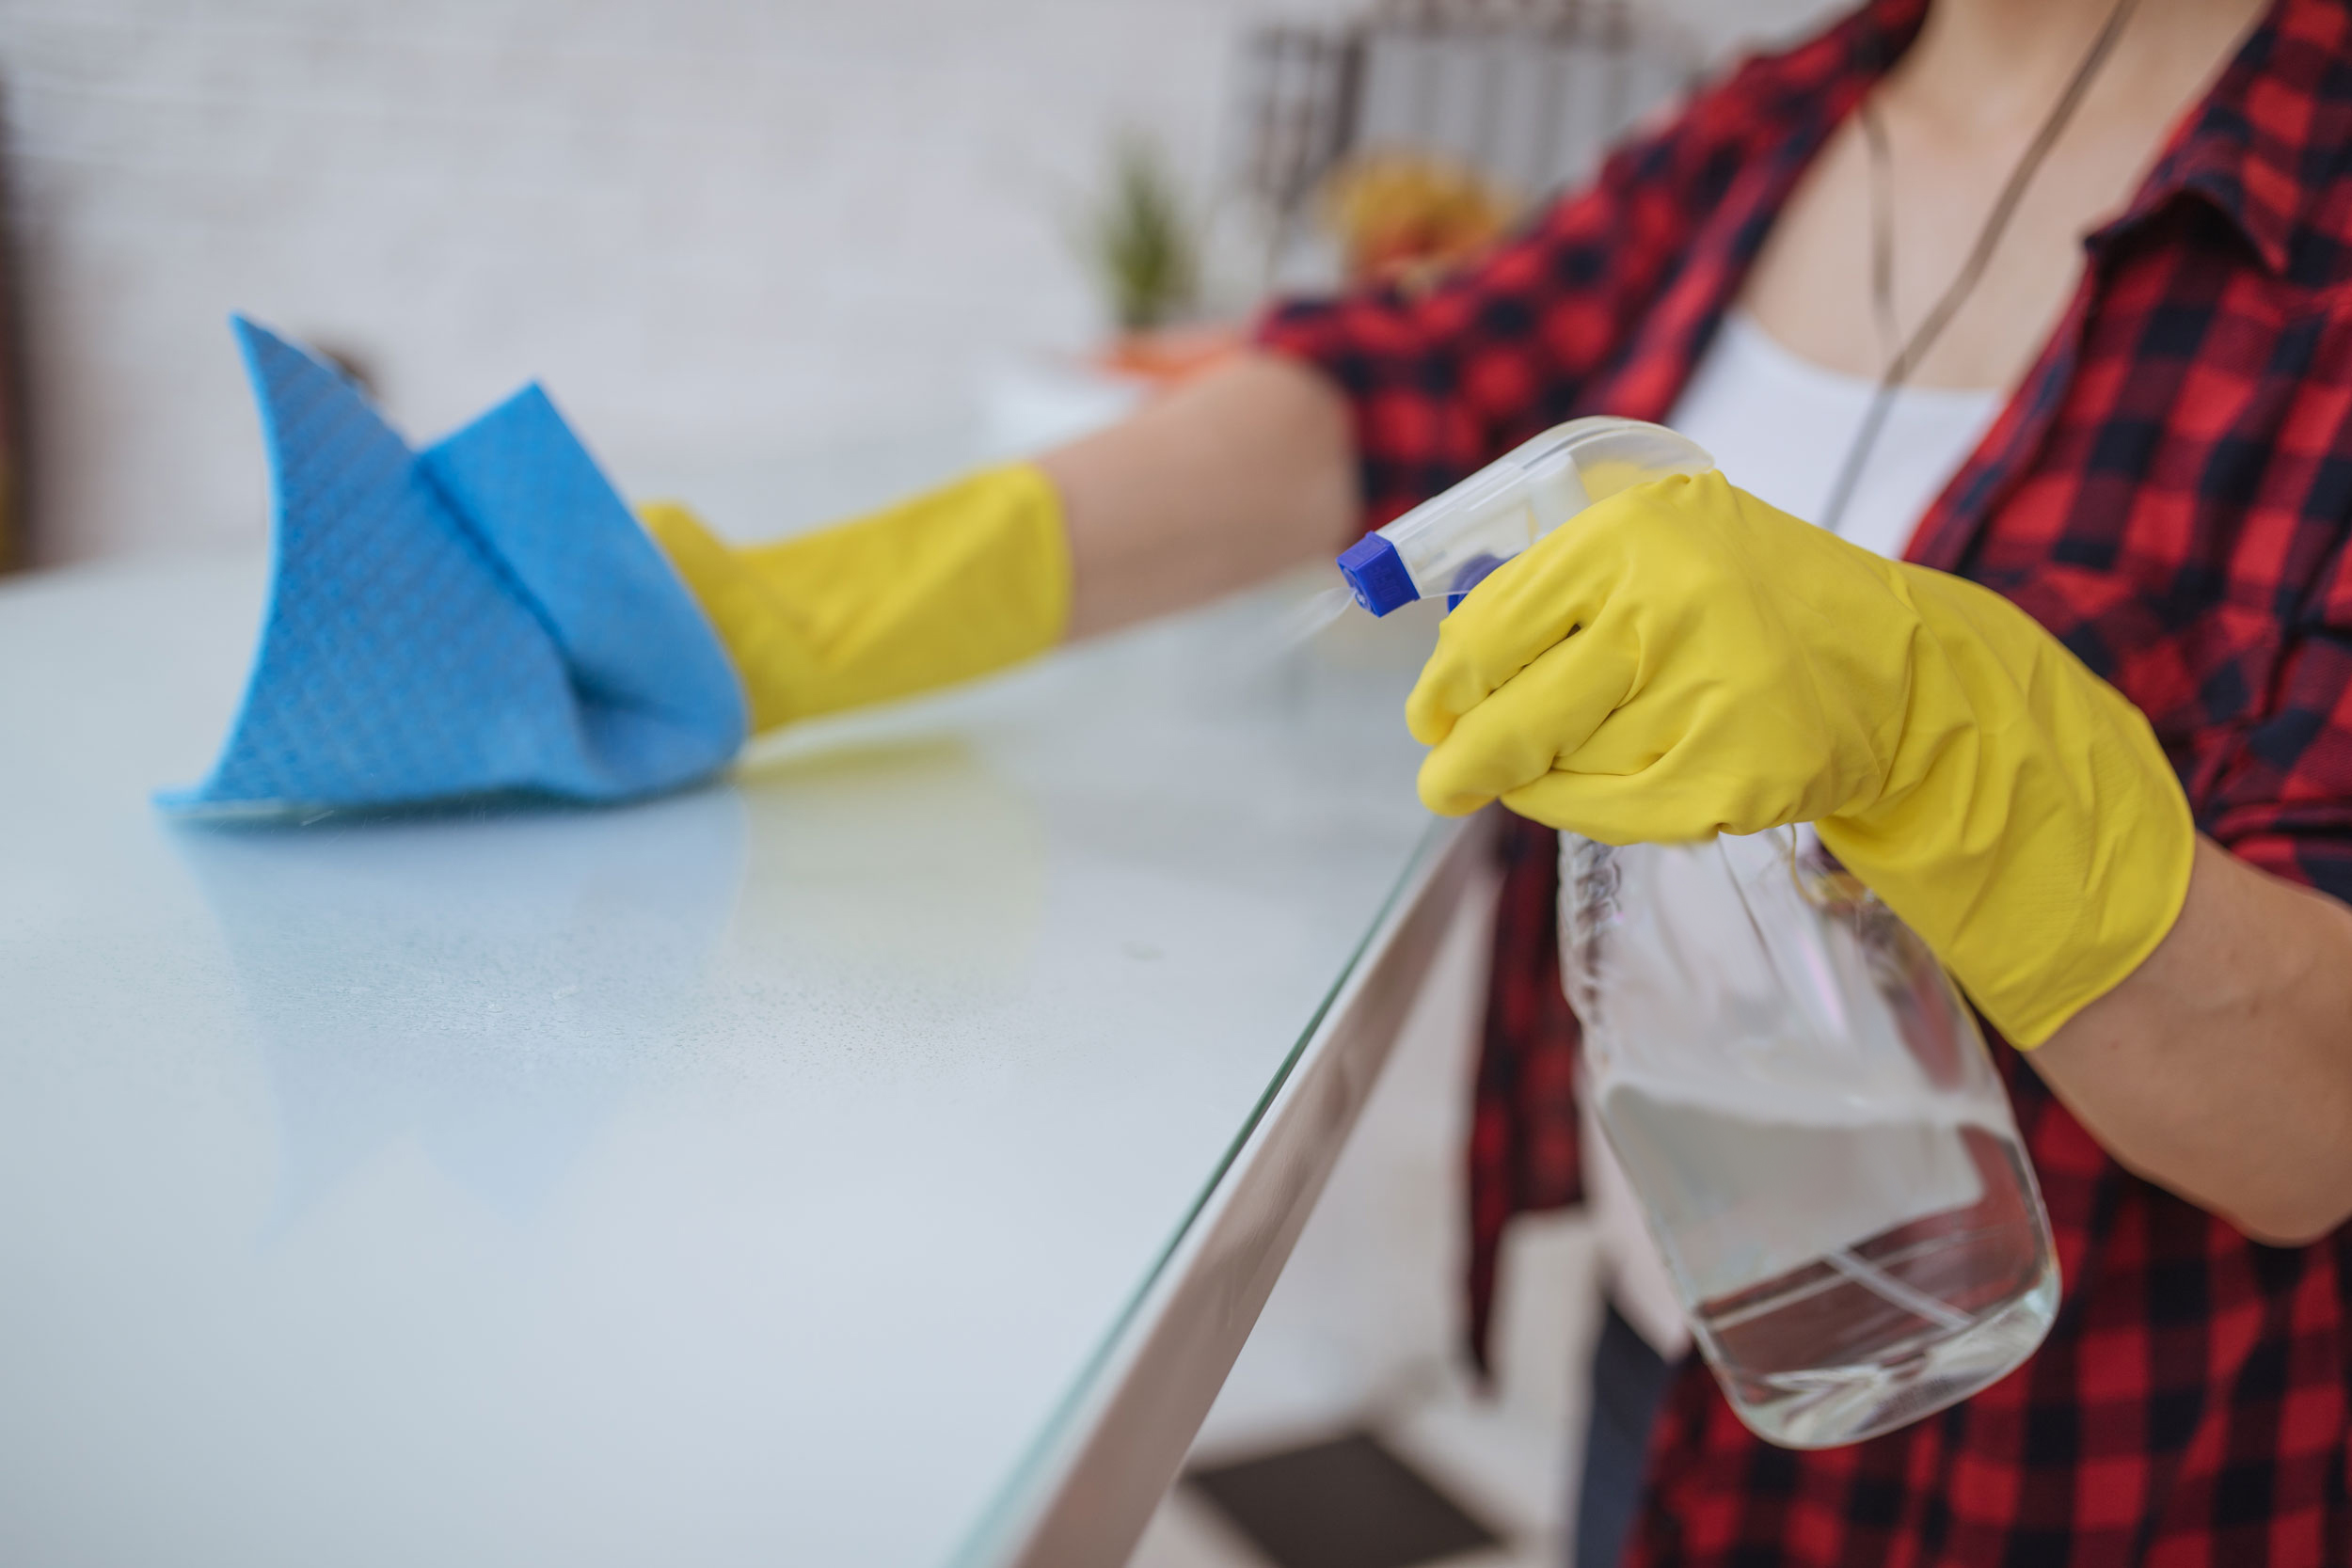 A woman wearing yellow, rubber gloves, spraying a homemade bleach solution on a kitchen counter.